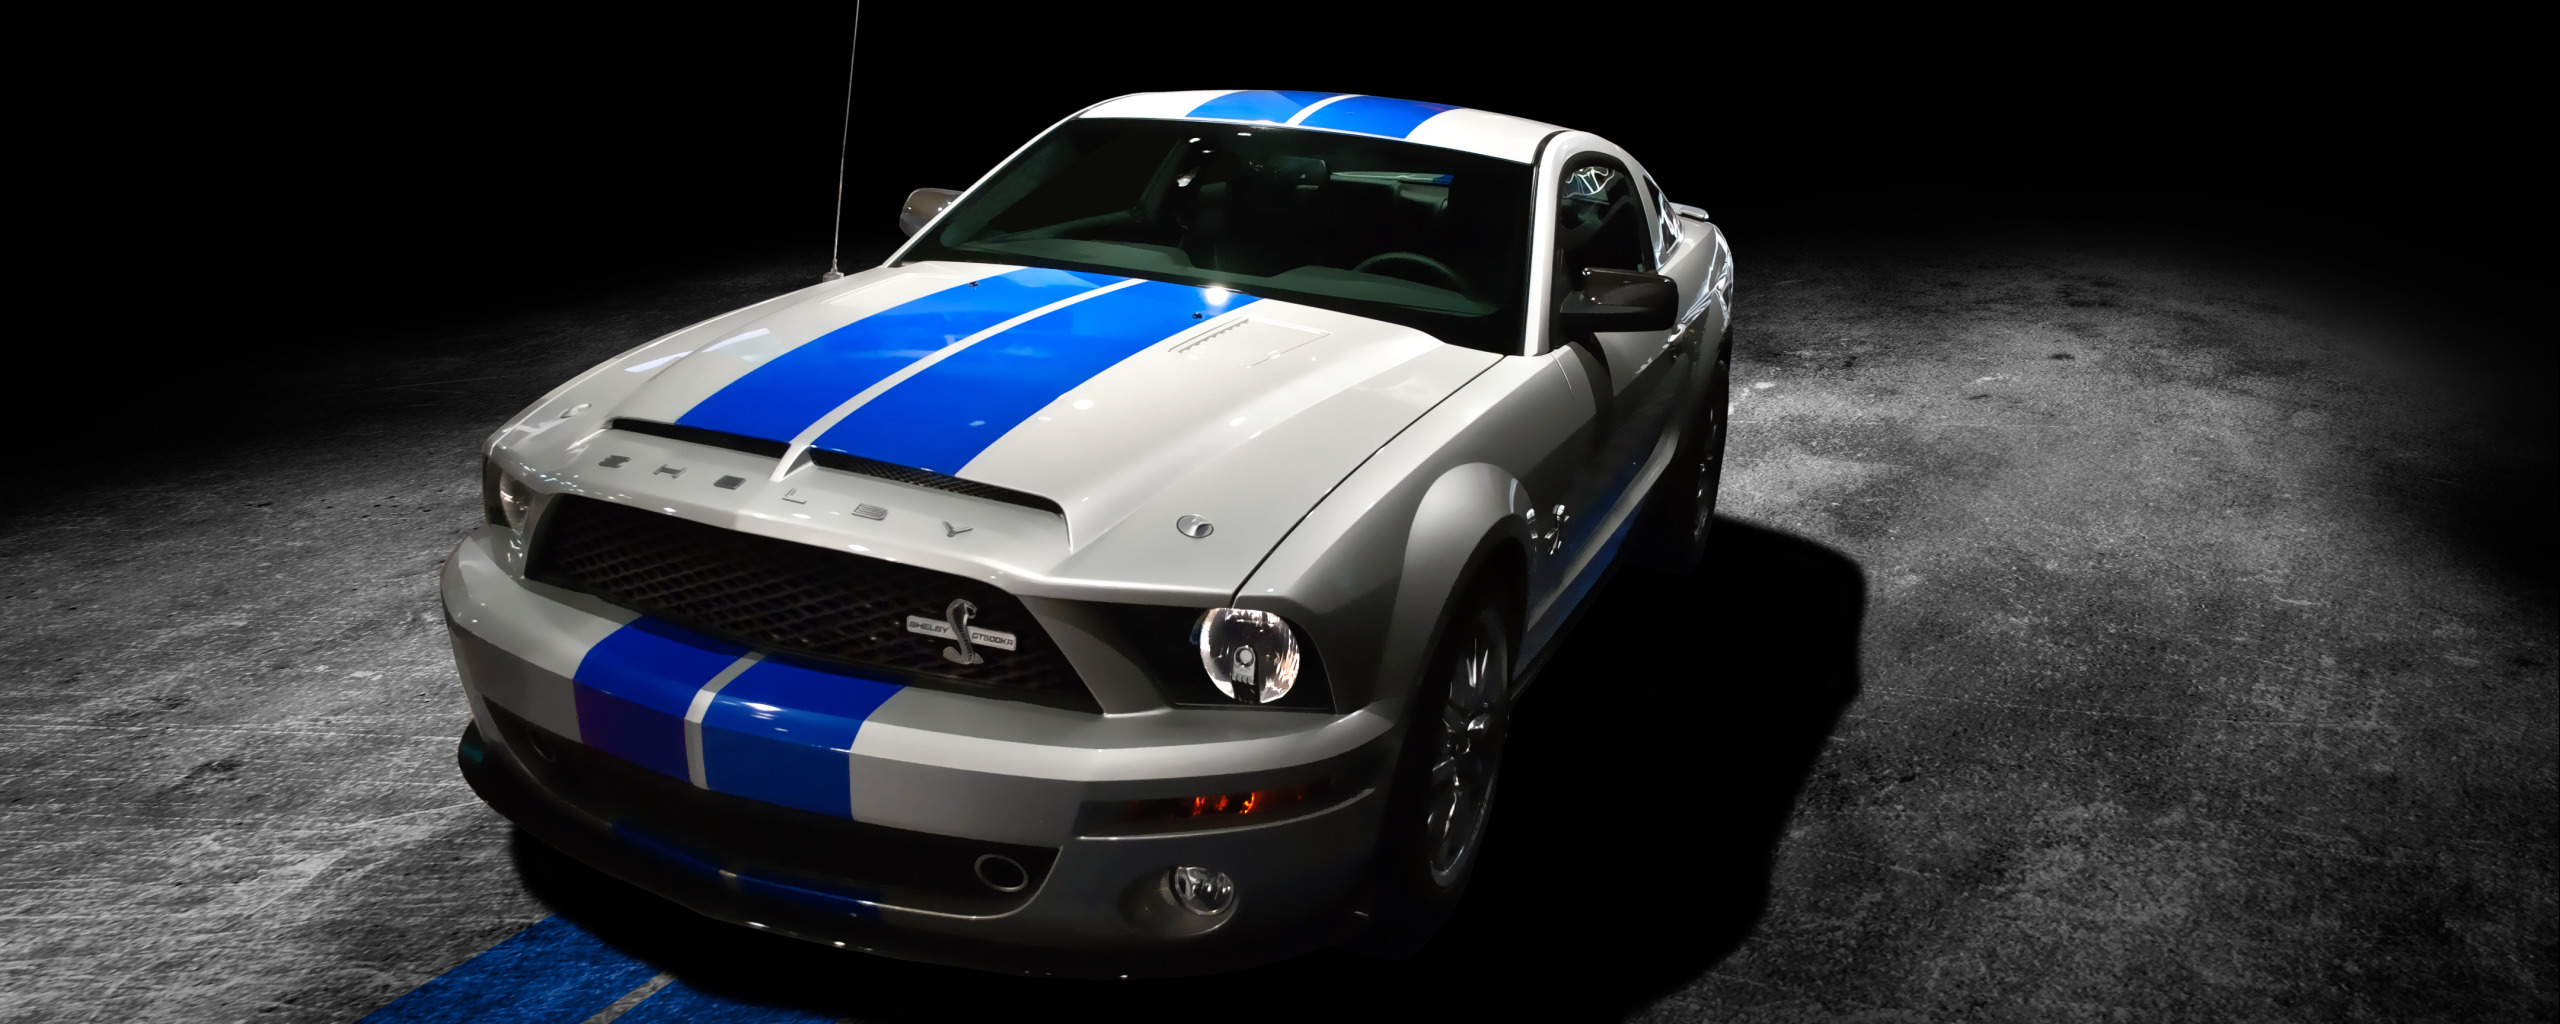 Ford Shelby gt500 2010. Ford Mustang Shelby gt 500 1967 обои. Ford Mustang Shelby gt500 Wallpaper. Ford Shelby, суперкар, вид спереди. Расход форд мустанг